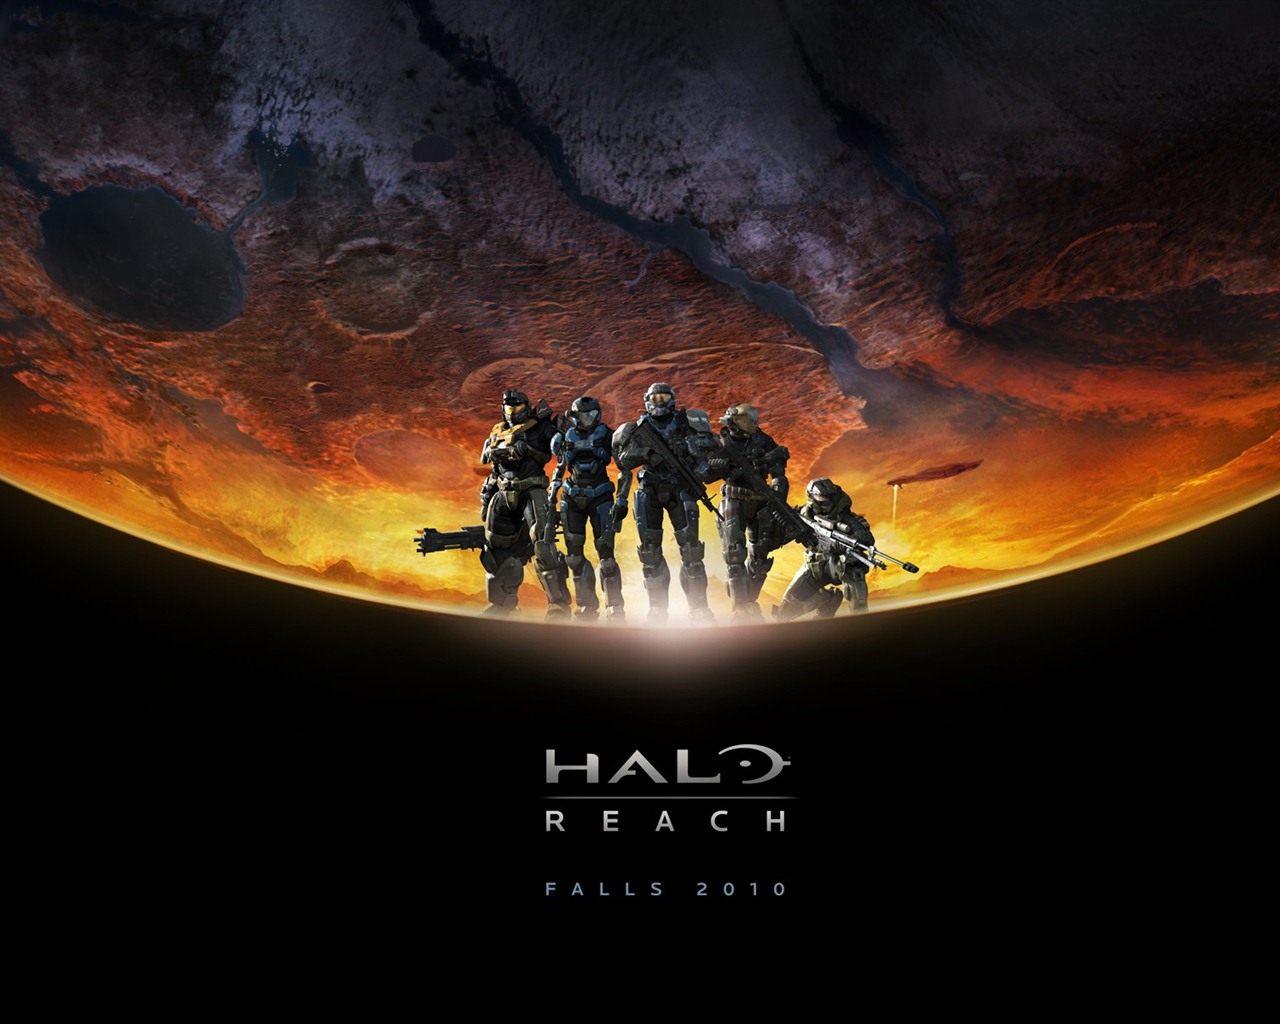 Halo game HD wallpapers #27 - 1280x1024